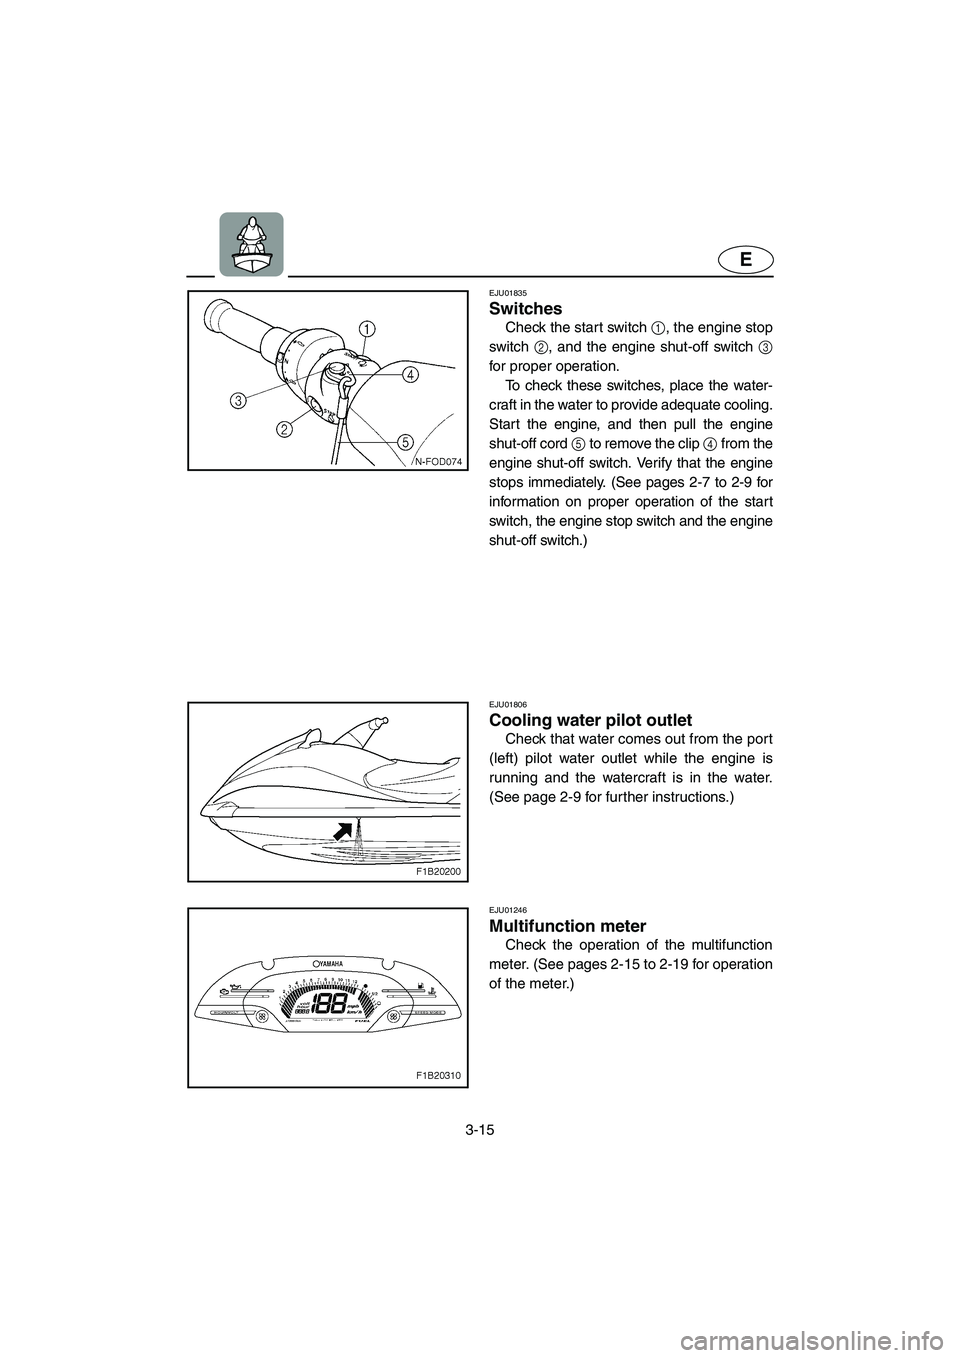 YAMAHA FX 2003  Owners Manual 3-15
E
EJU01835
Switches 
Check the start switch 1, the engine stop
switch 2, and the engine shut-off switch 3
for proper operation. 
To check these switches, place the water-
craft in the water to pr